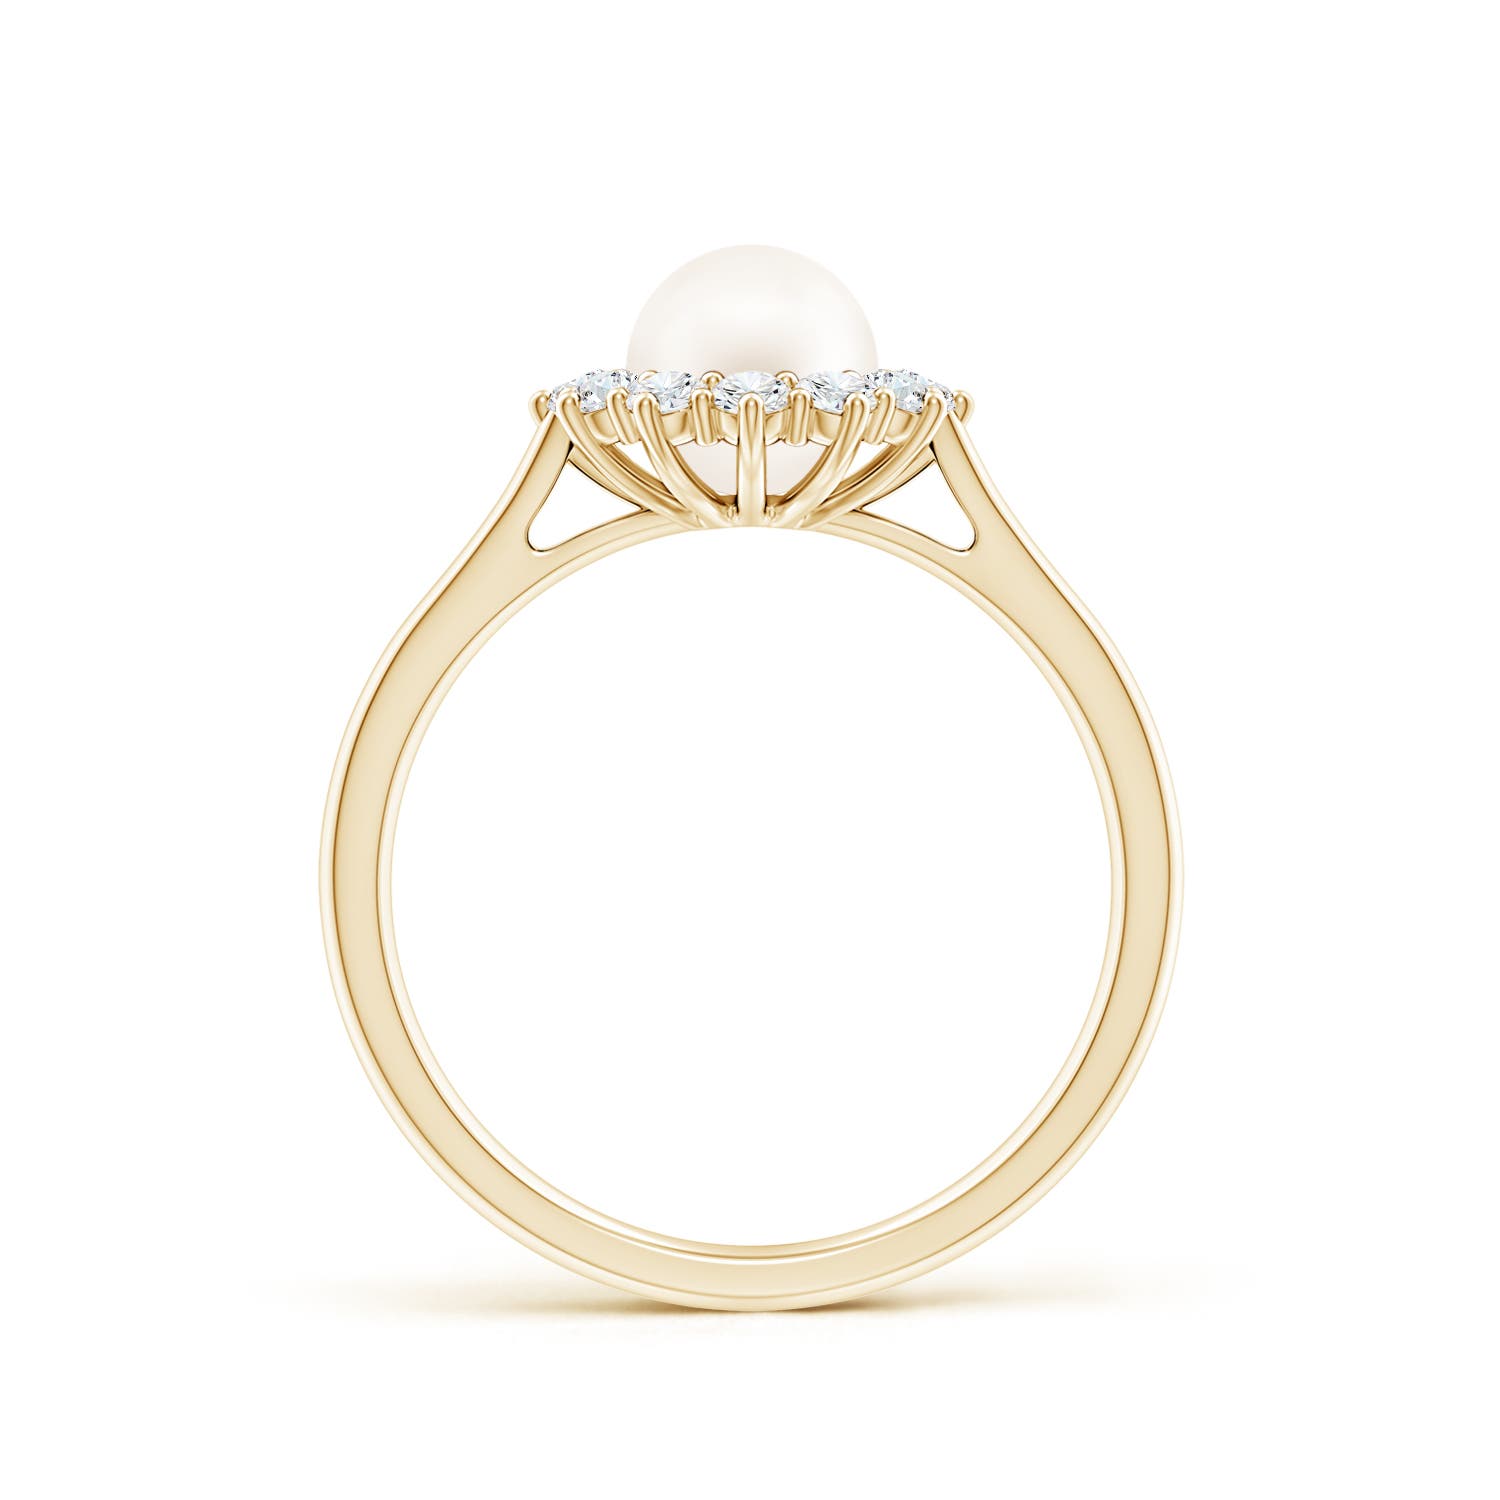 AA / 1.88 CT / 14 KT Yellow Gold